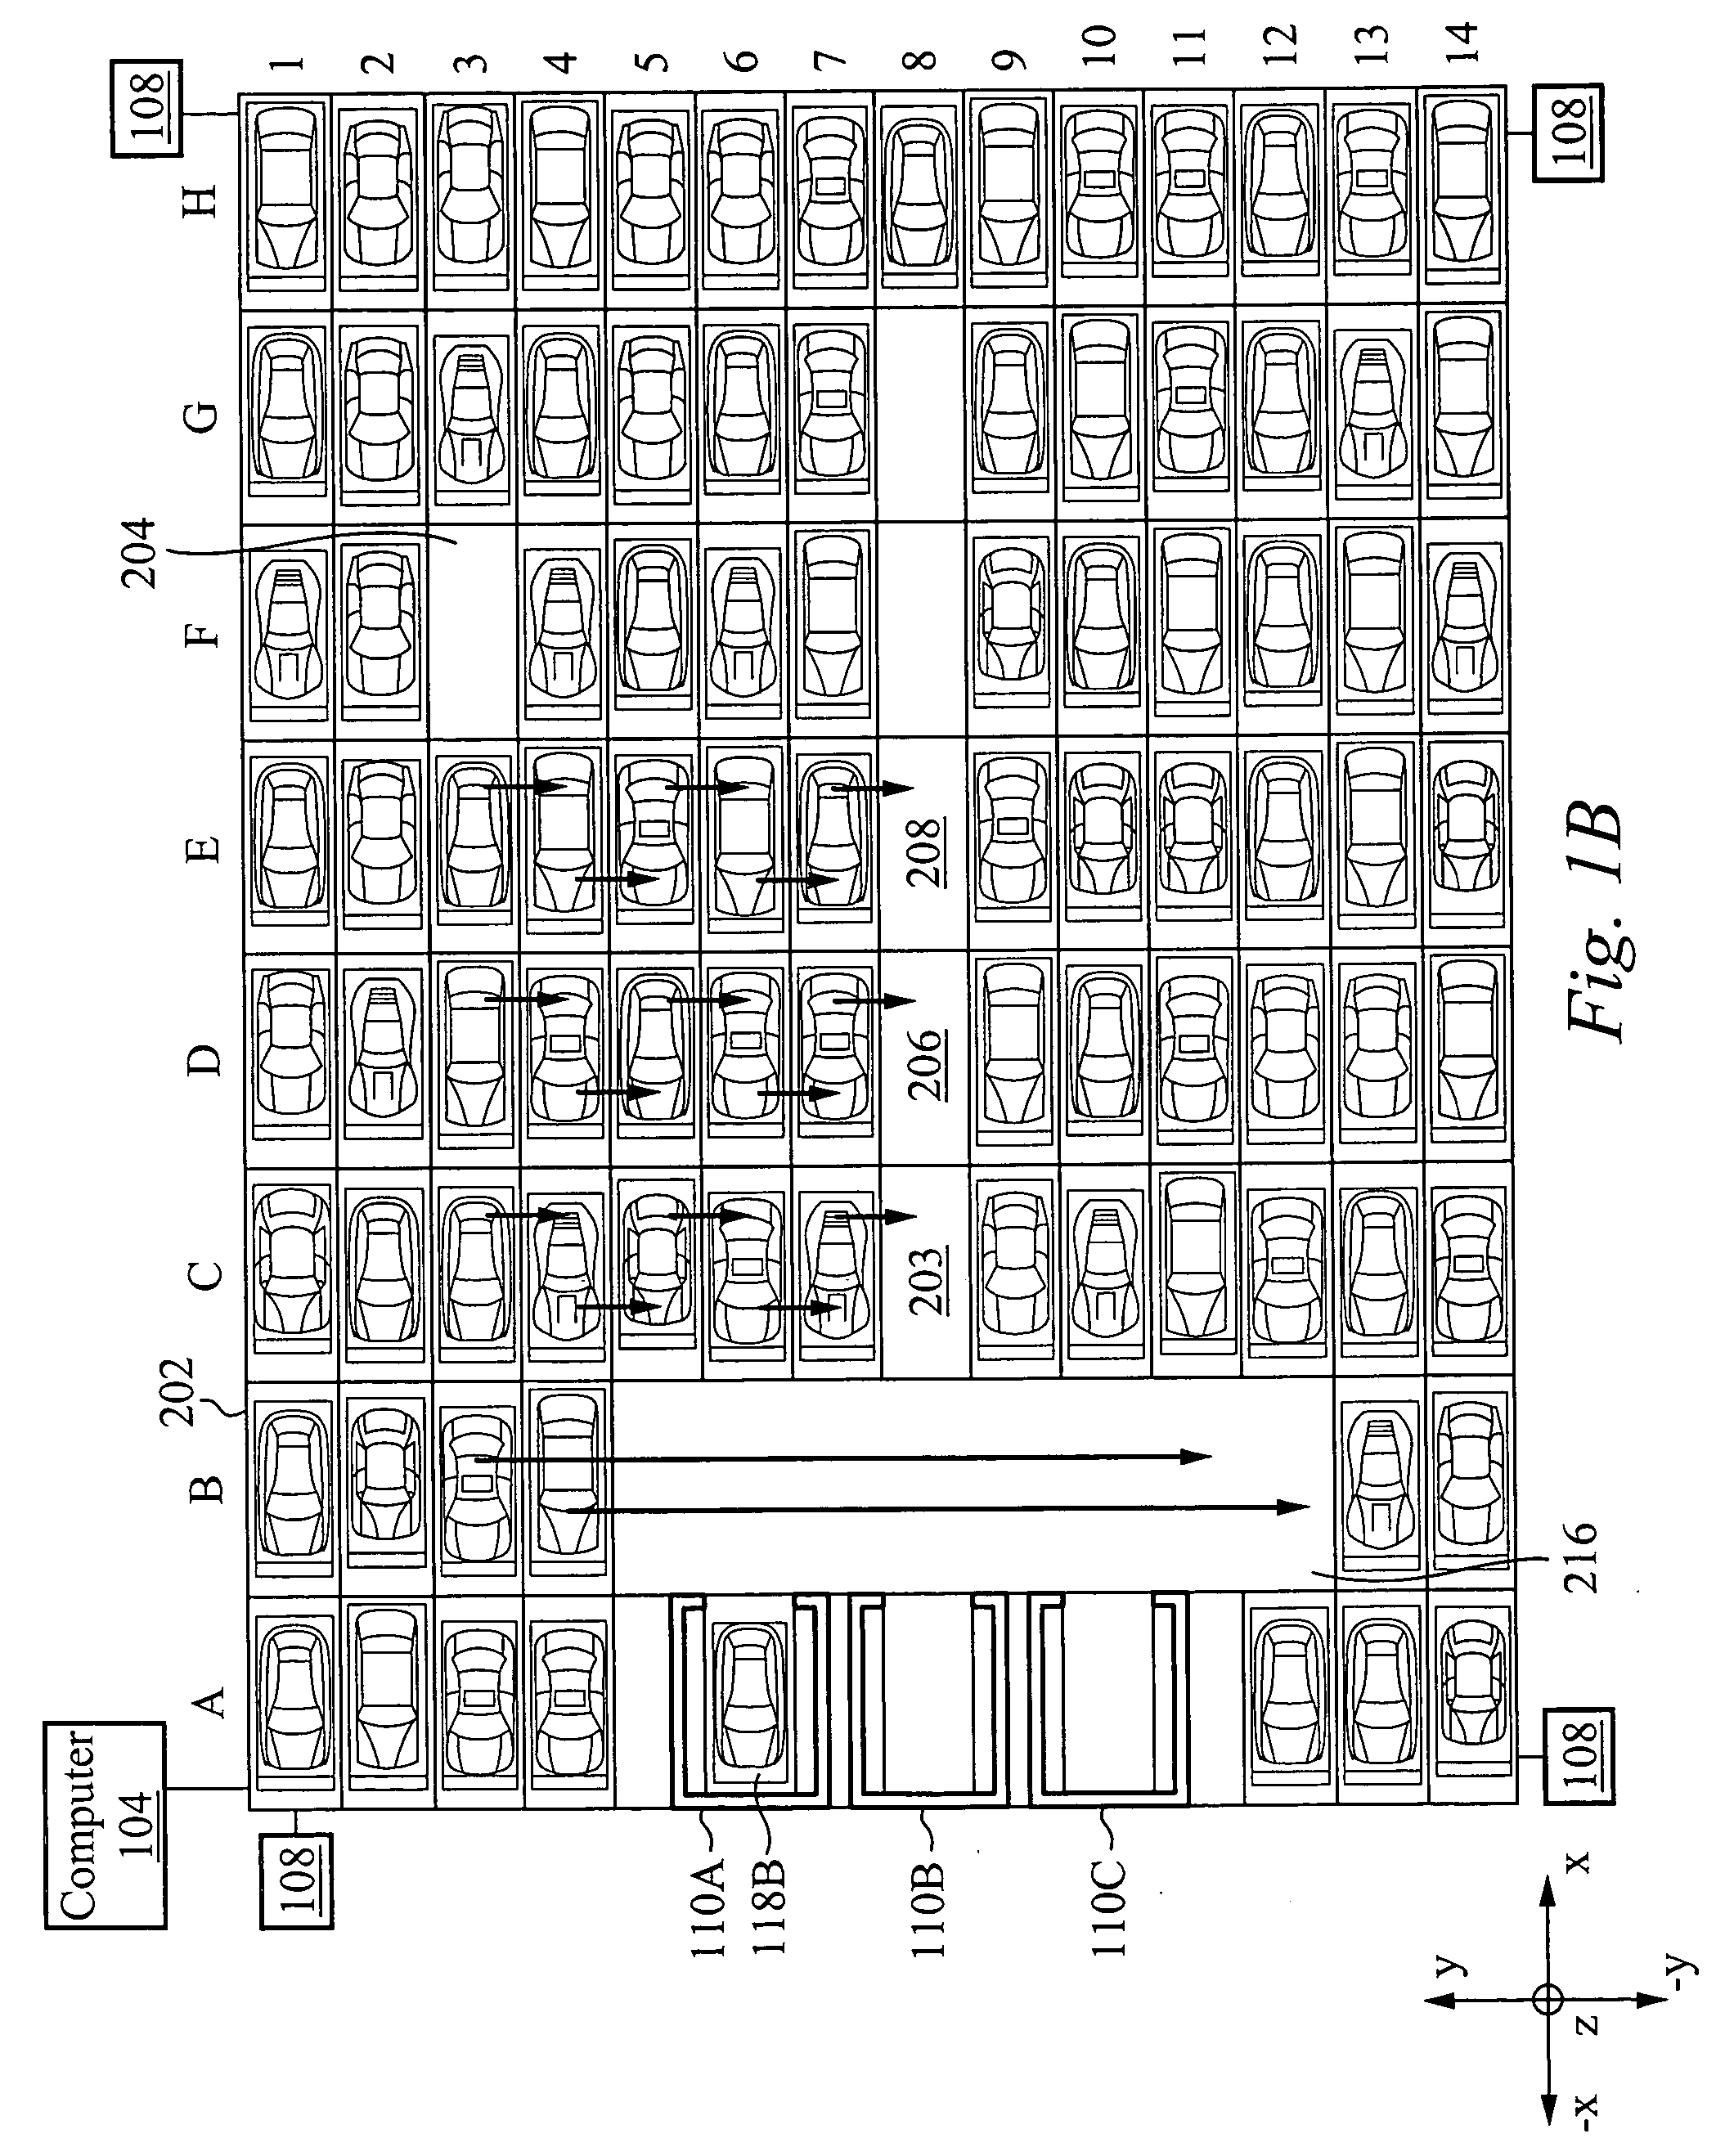 Method and system for automatically parking vehicles